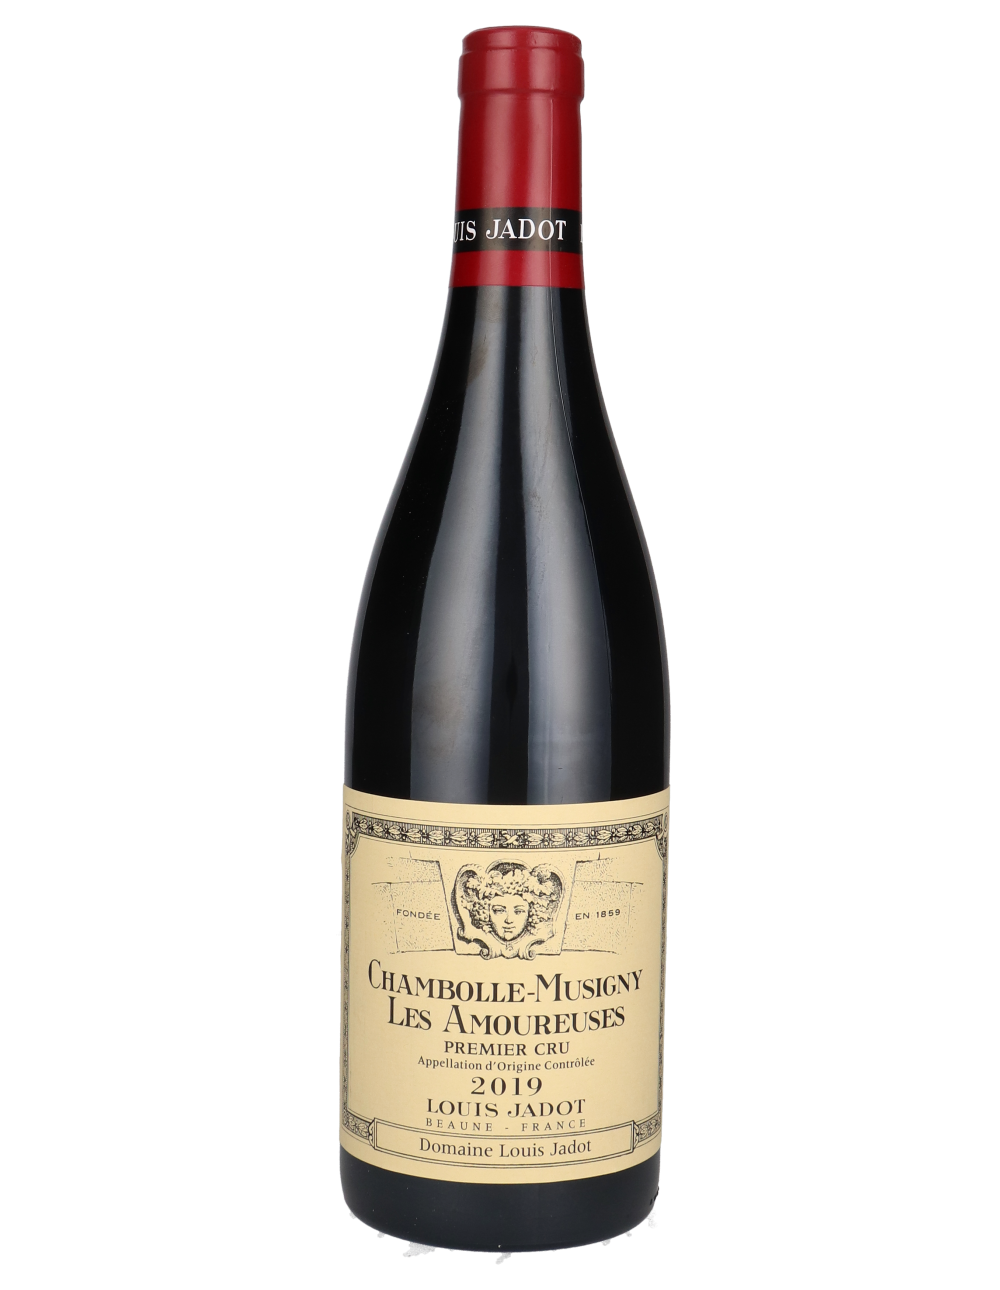 Chambolle-Musigny 1er Cru "Les Amoureuses"